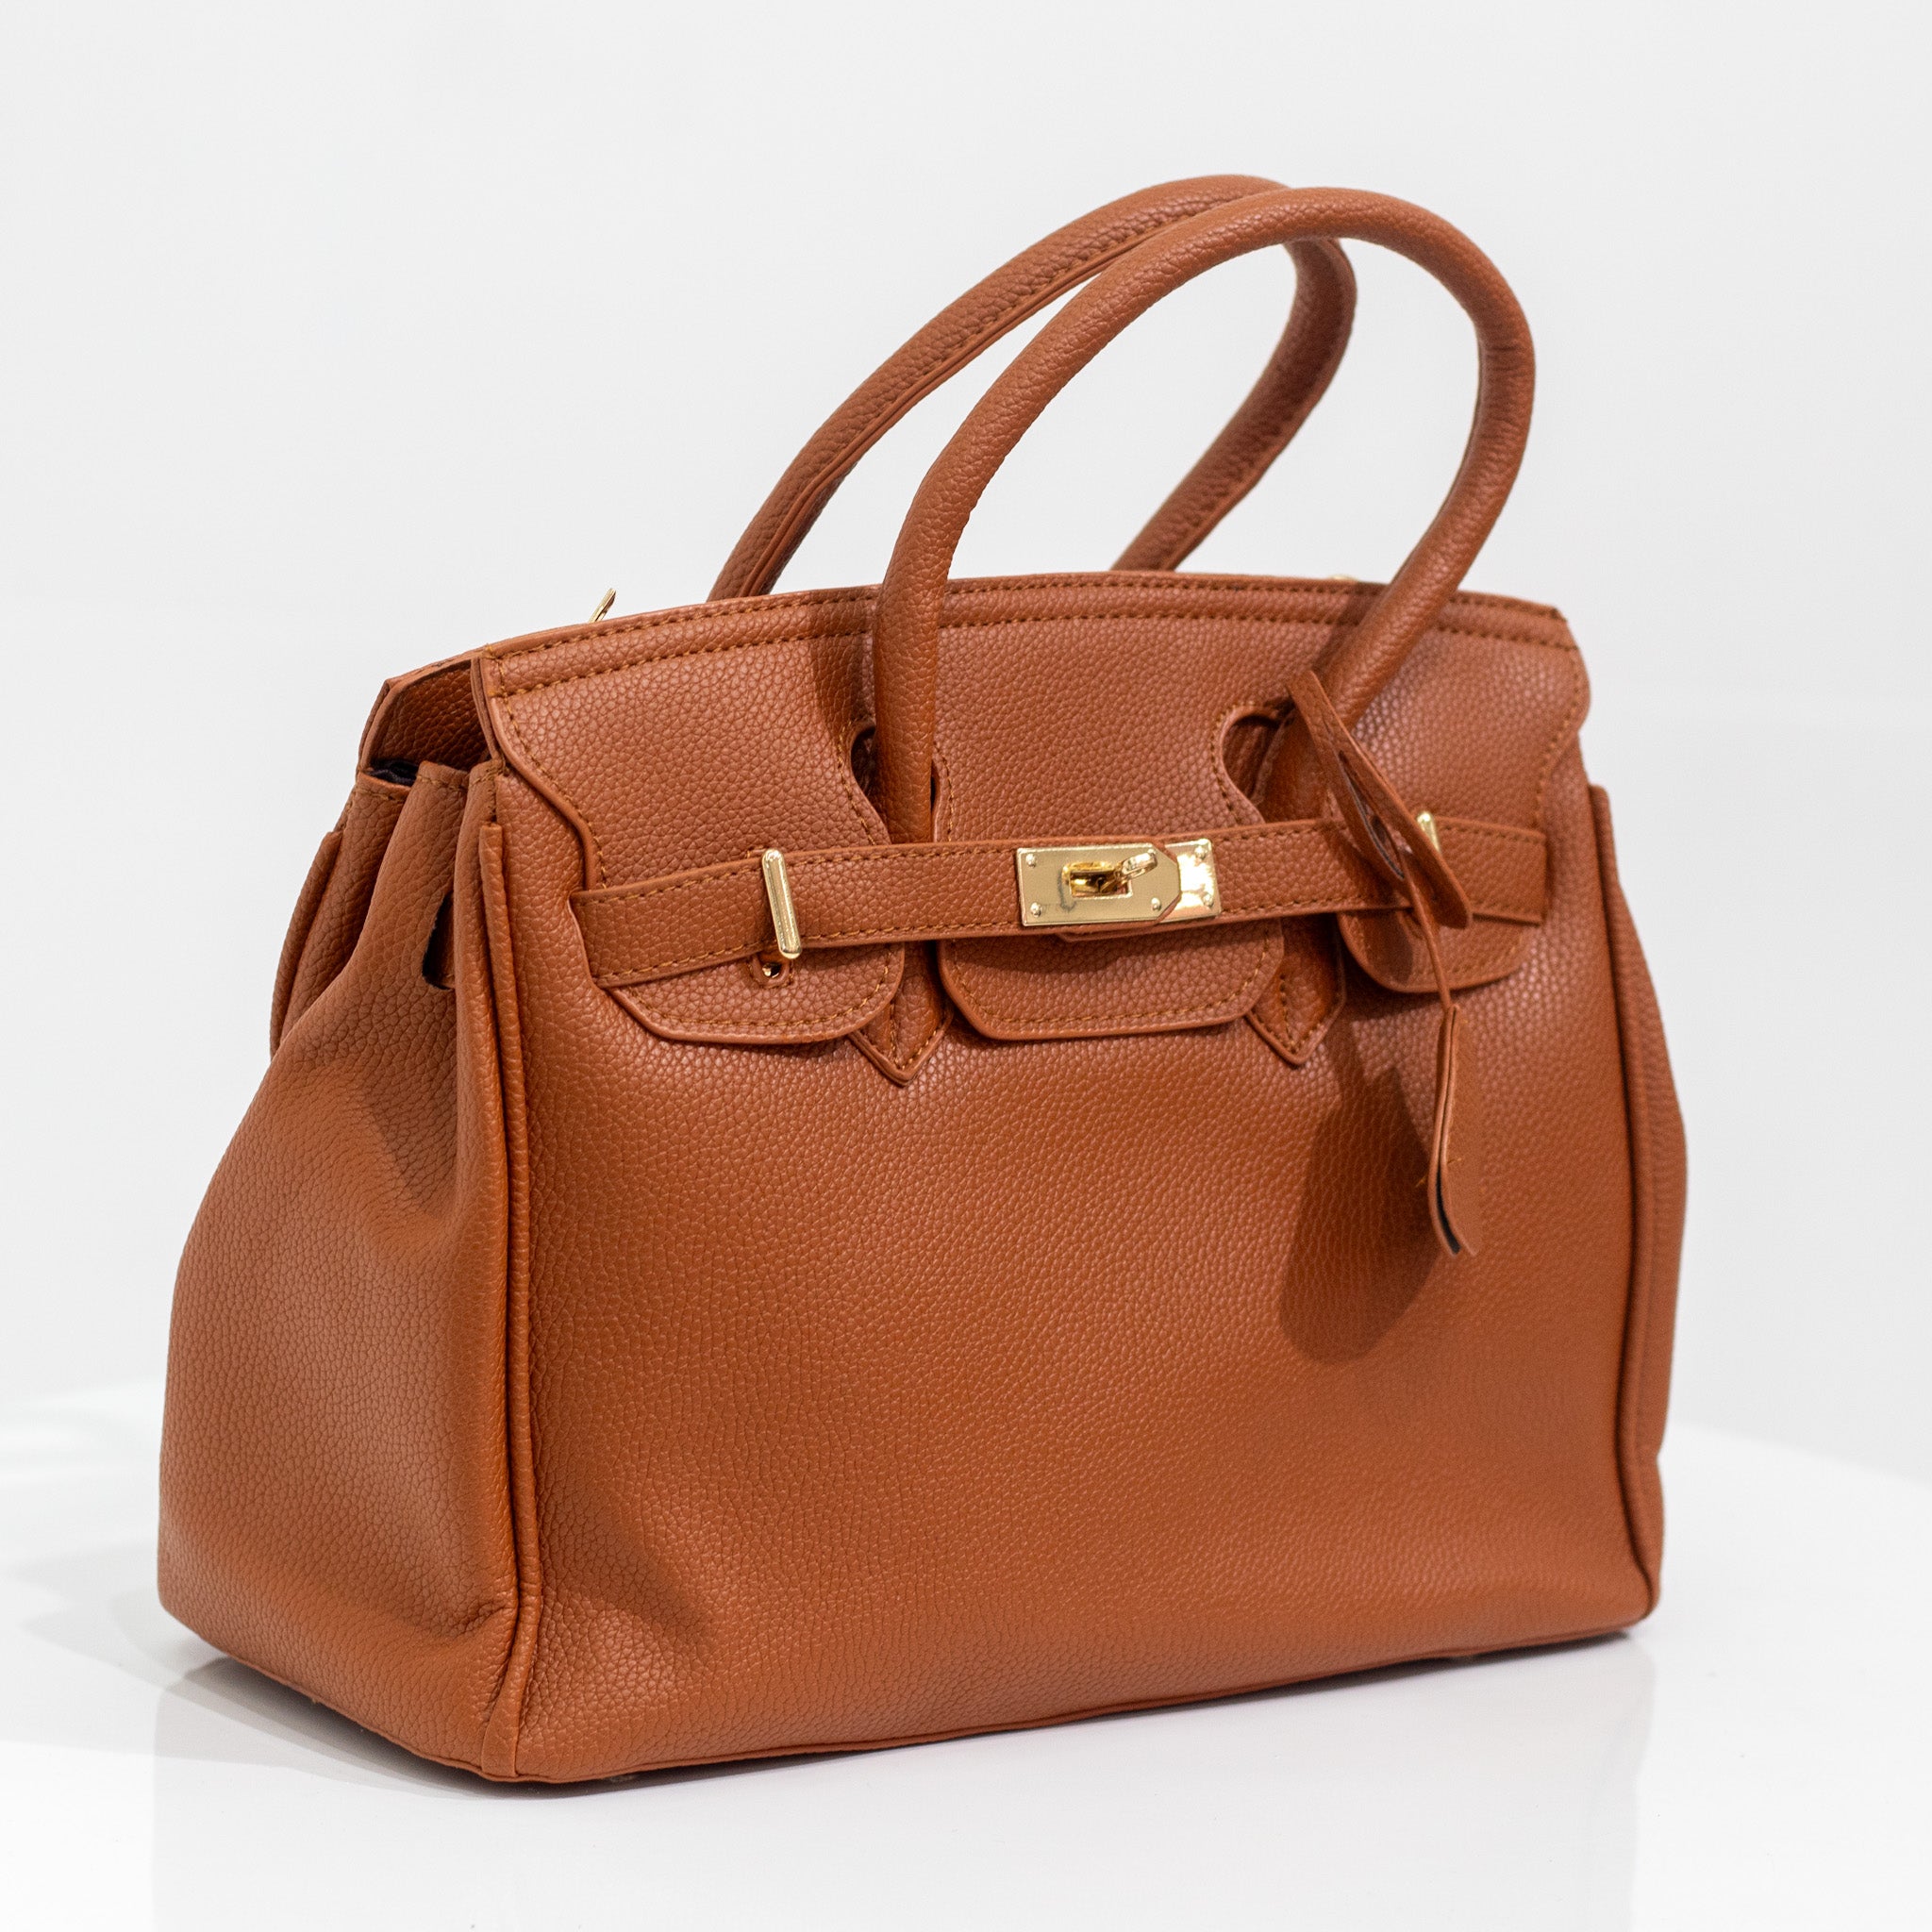 Brown faux leather hand bag quincy